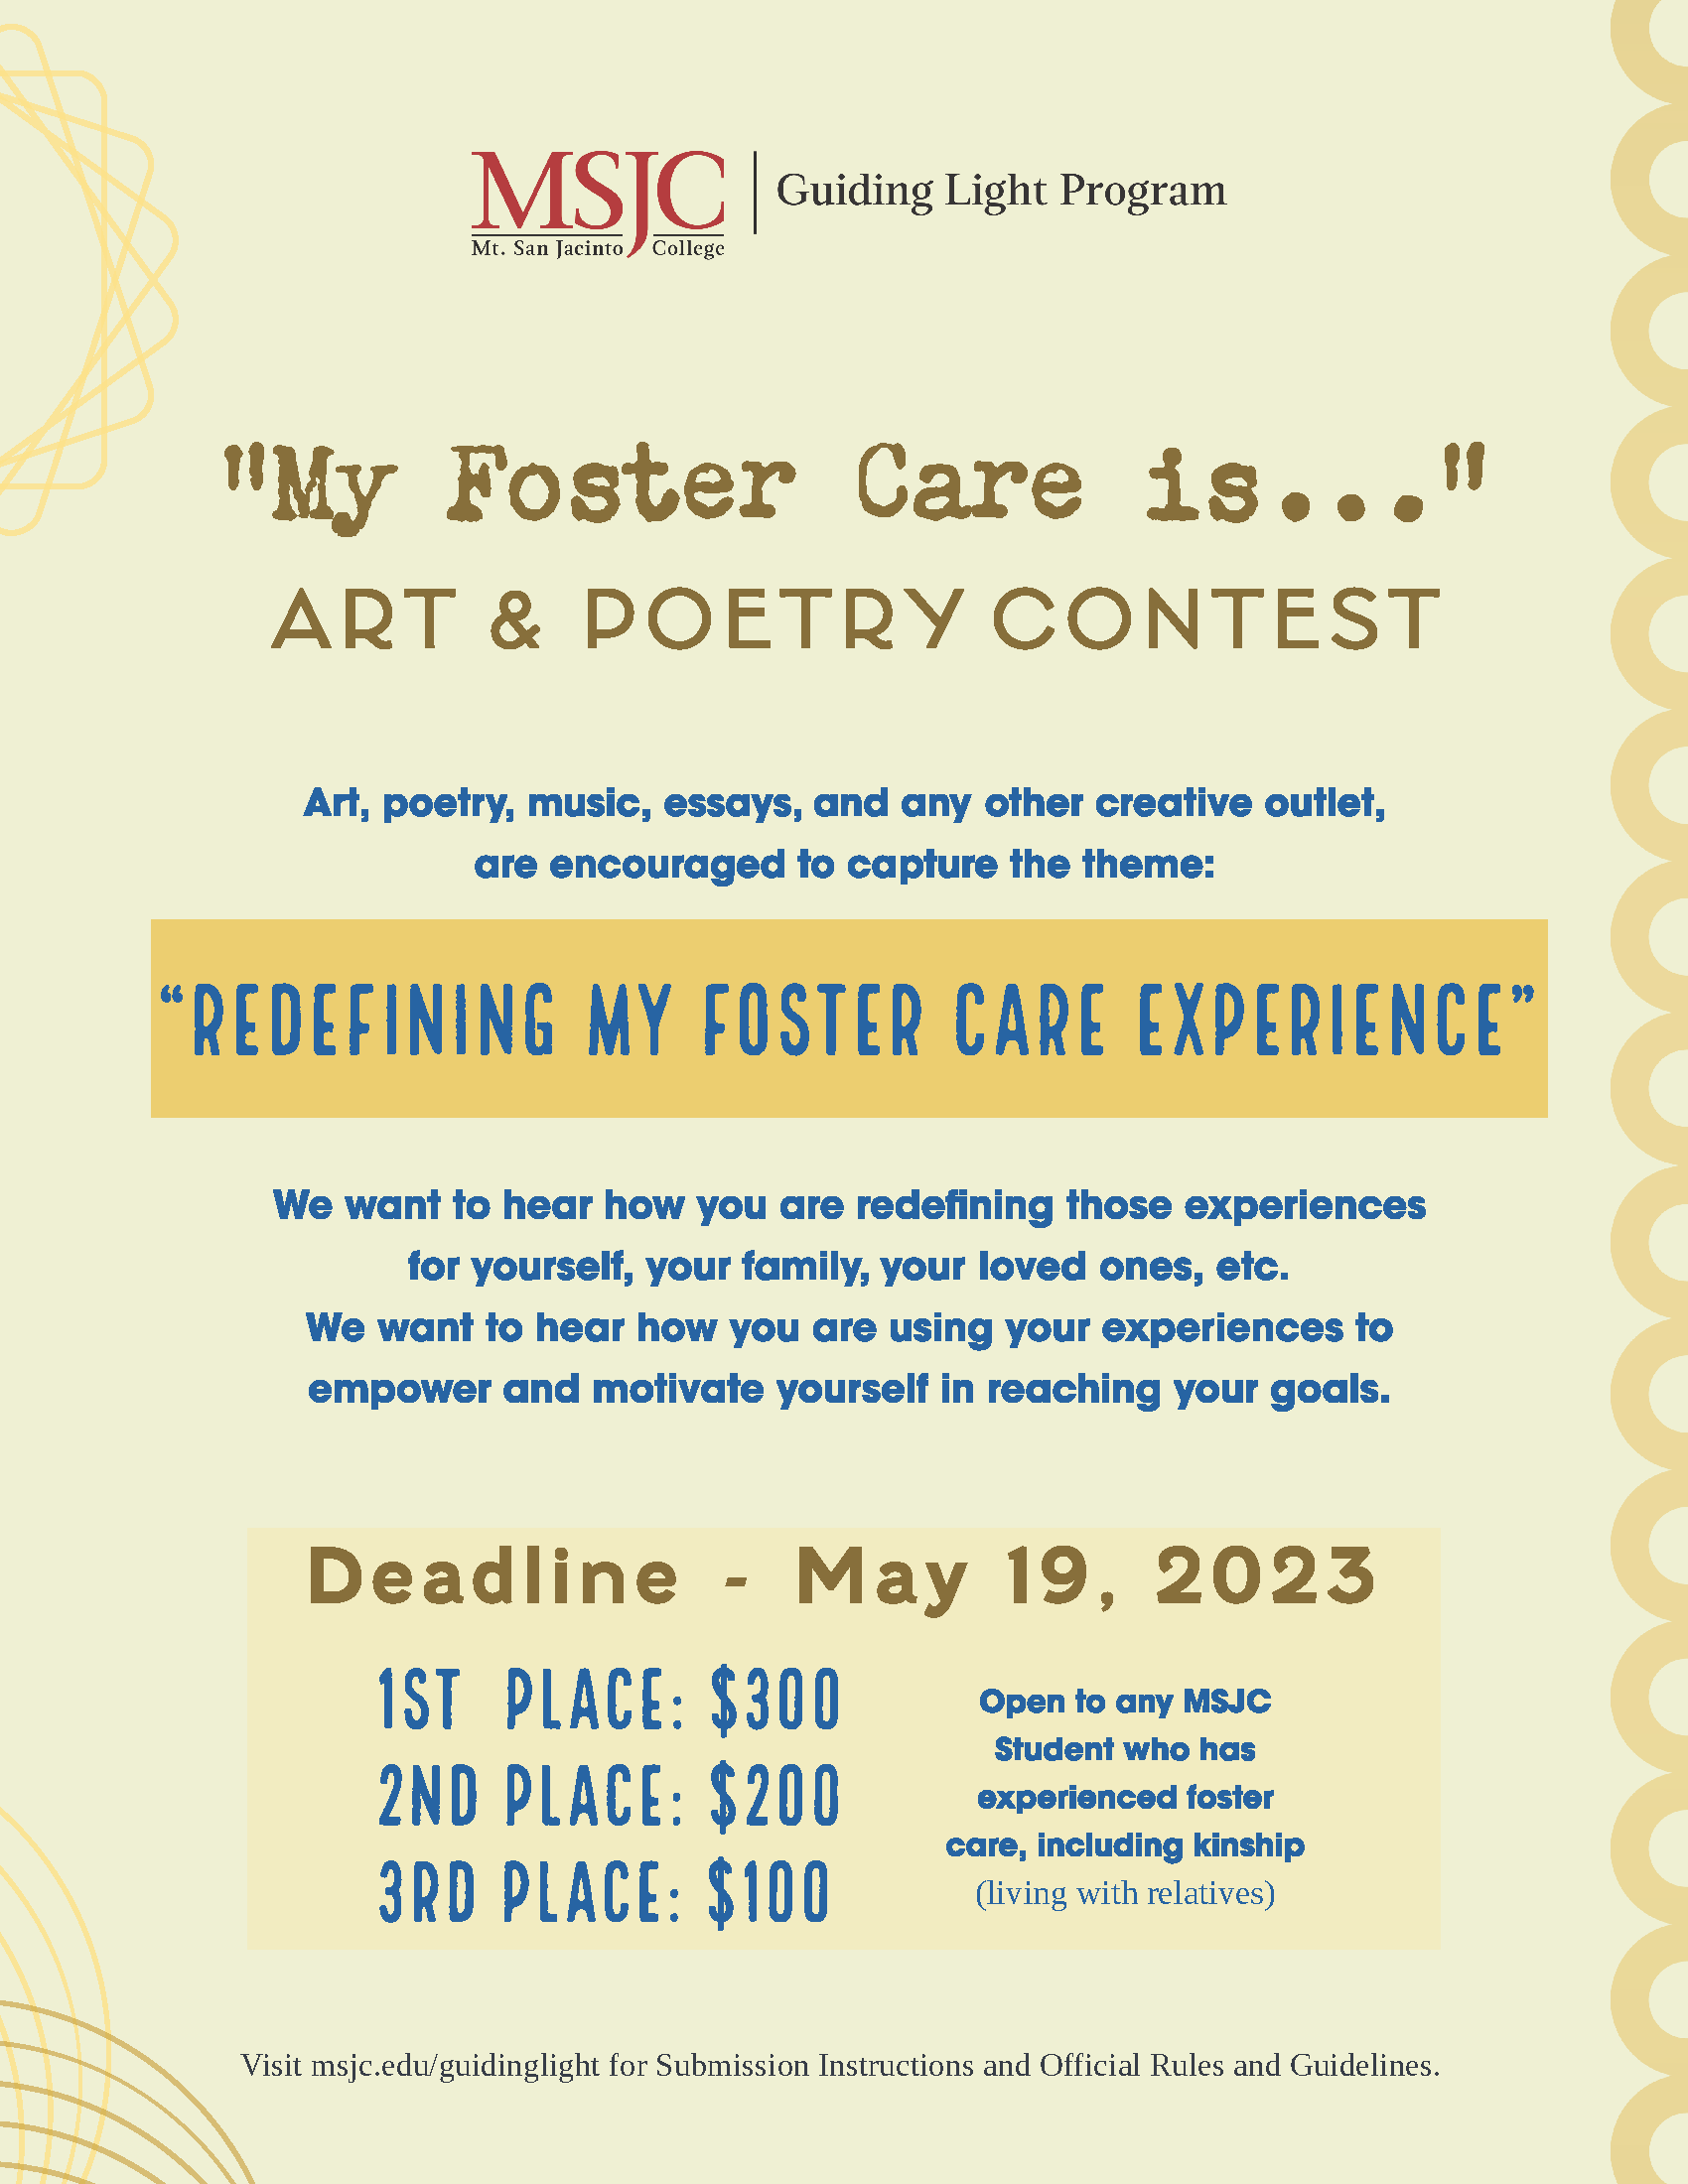 Art and Poetry Contest flyer